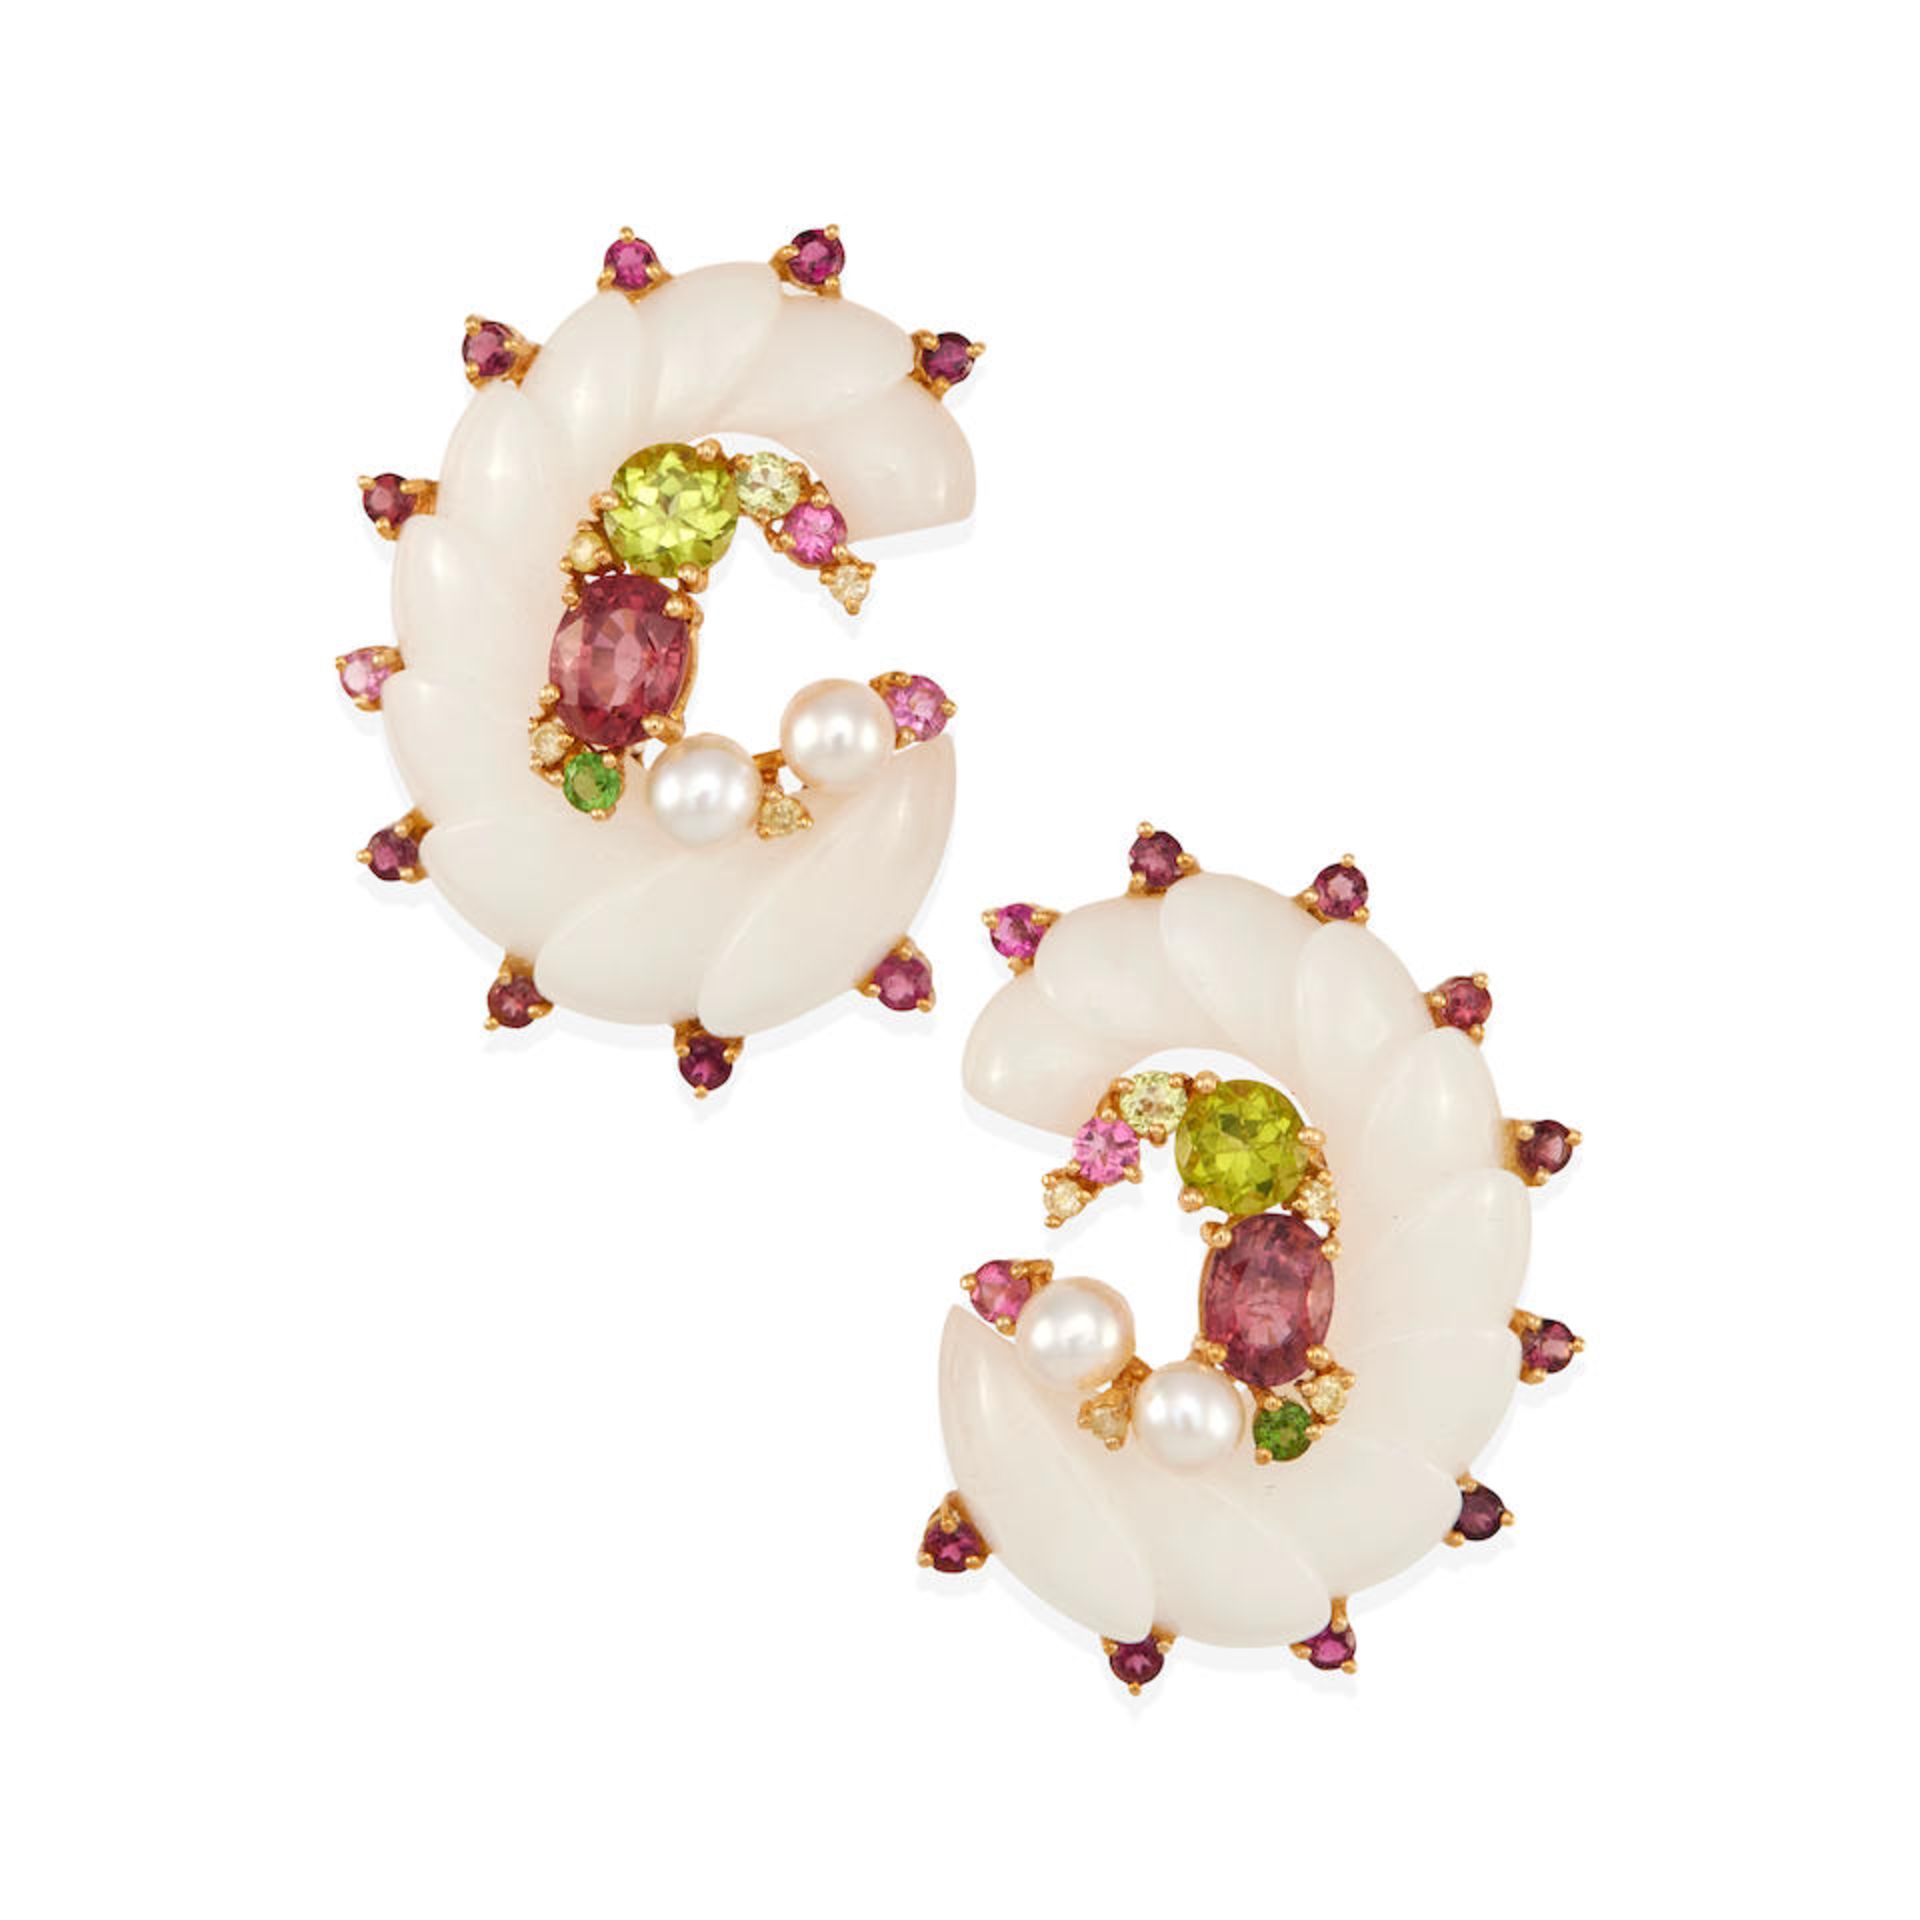 A PAIR OF 18K GOLD, WHITE AGATE AND GEM-SET CLIP EARRINGS